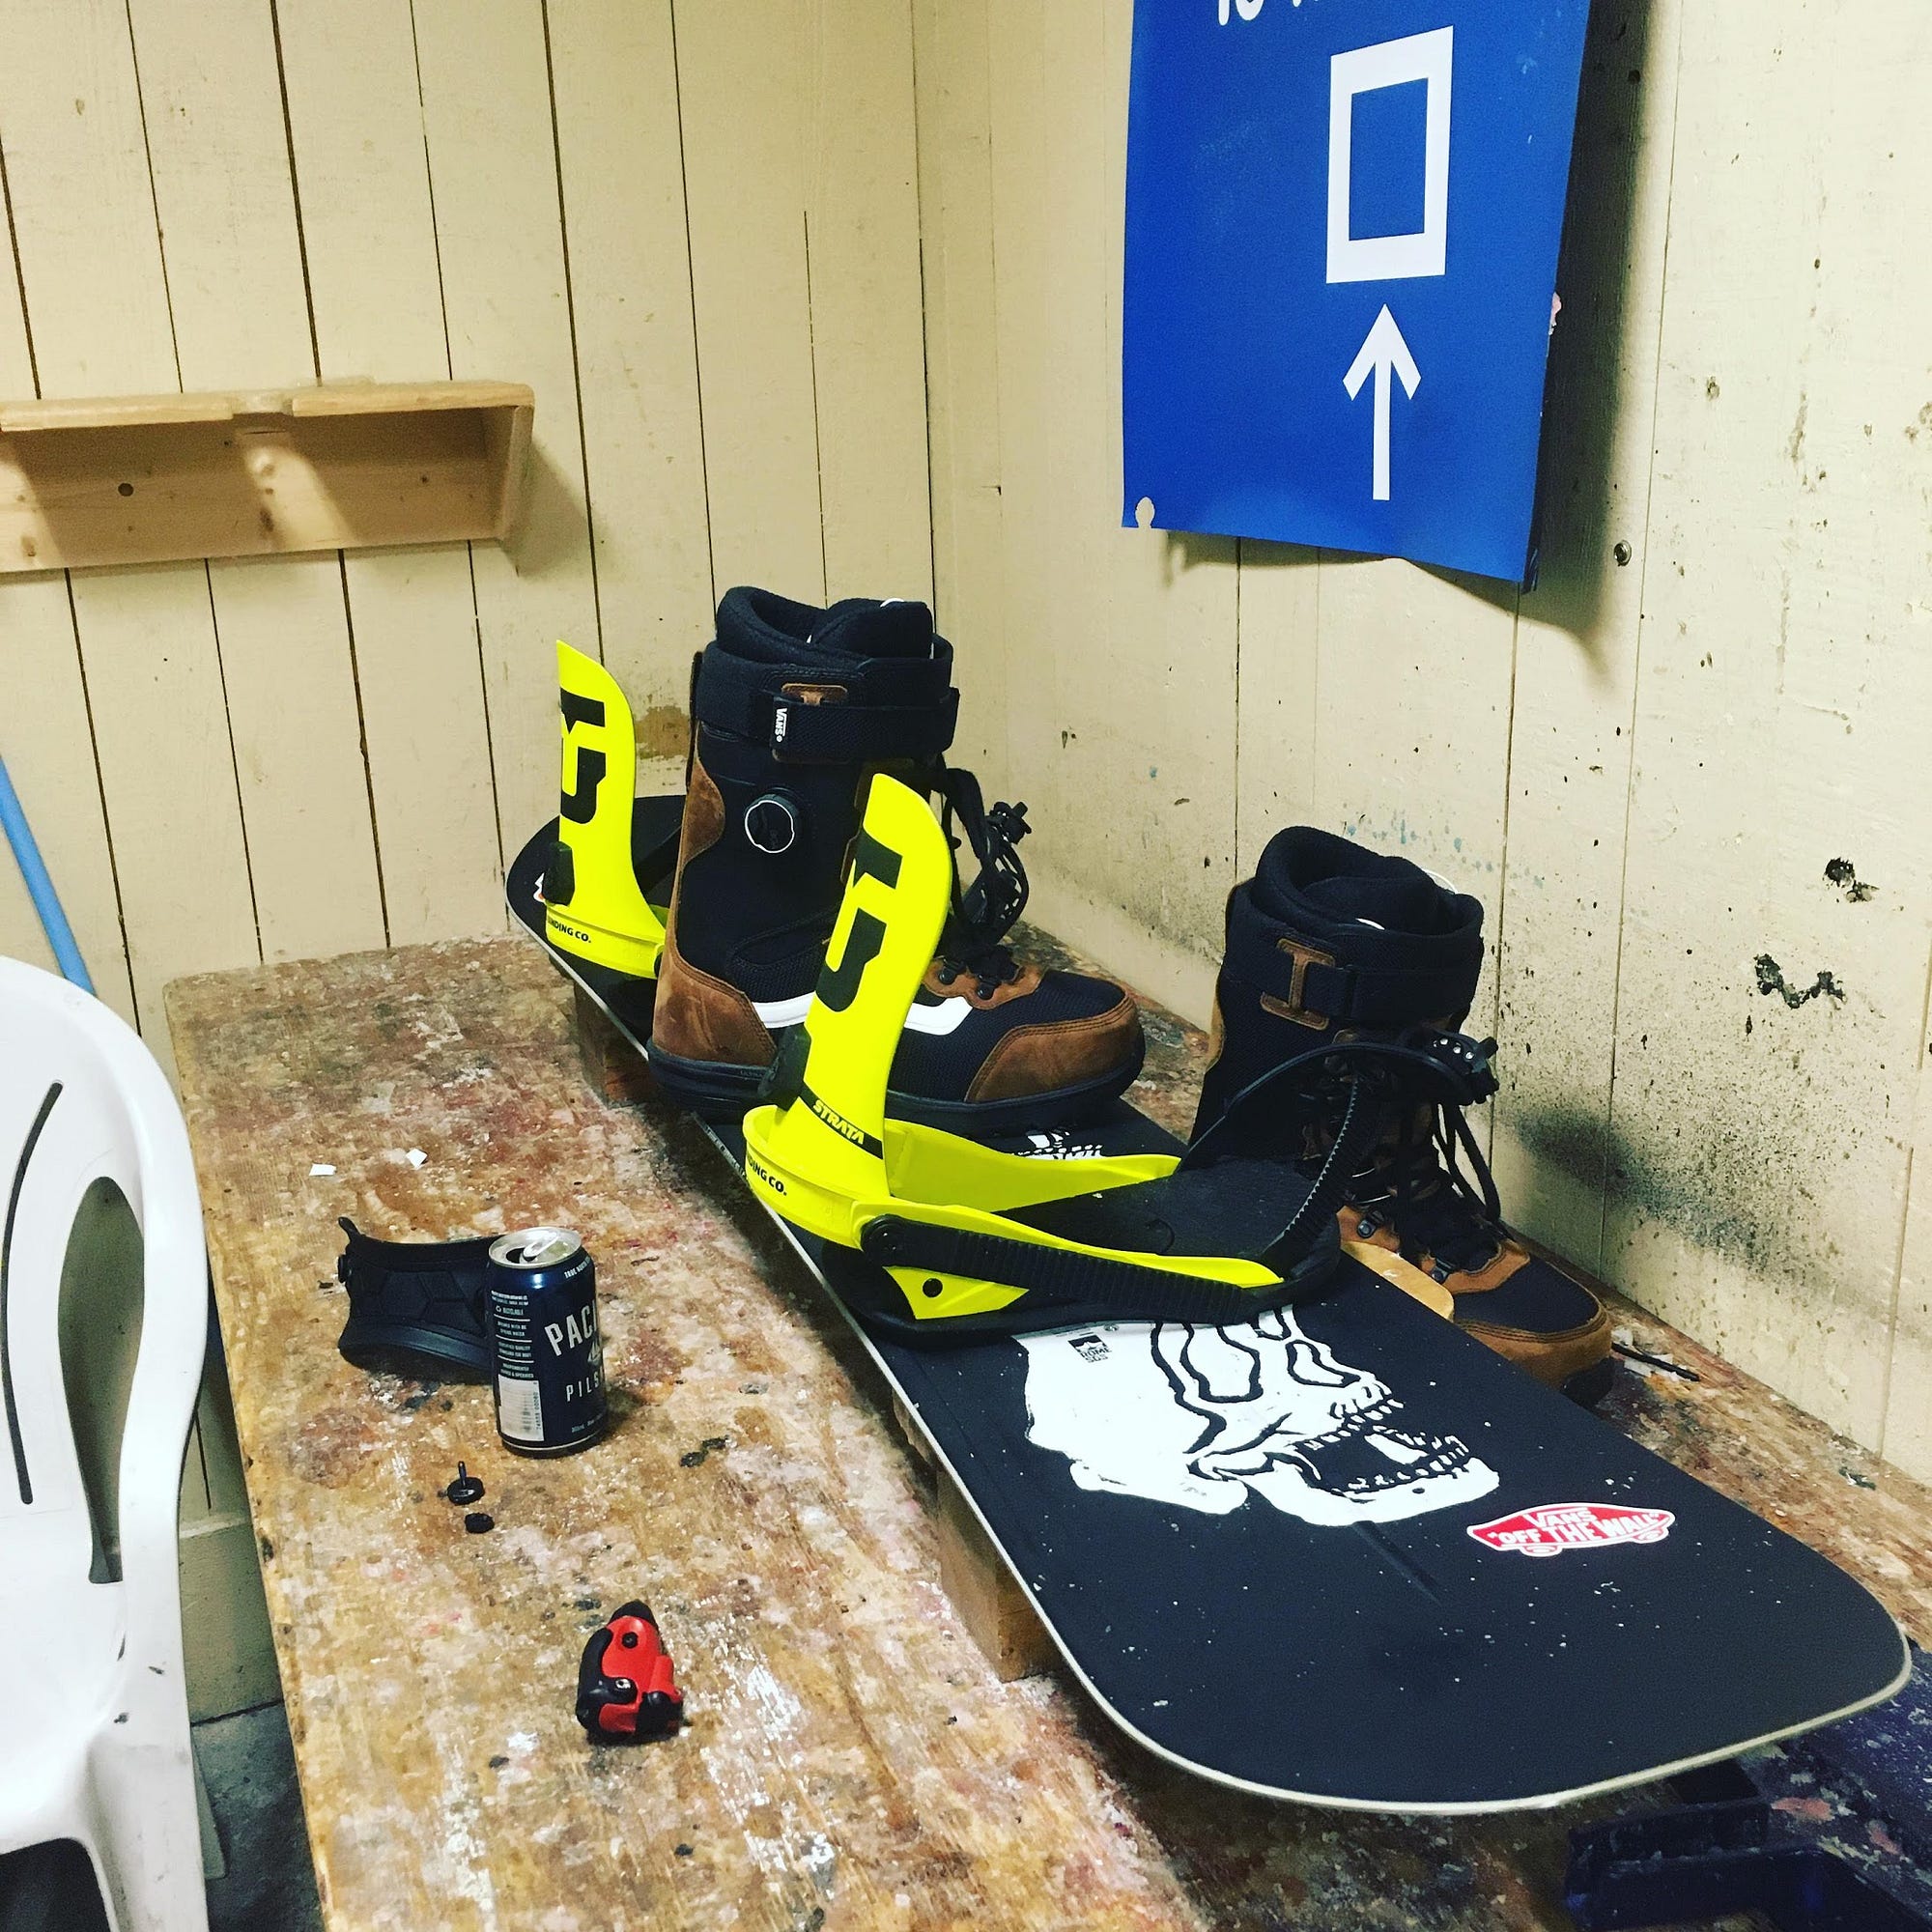 How to prepare a new snowboard. A guide on how to prepare your new wood… |  by Brecht Verhoeve | Medium